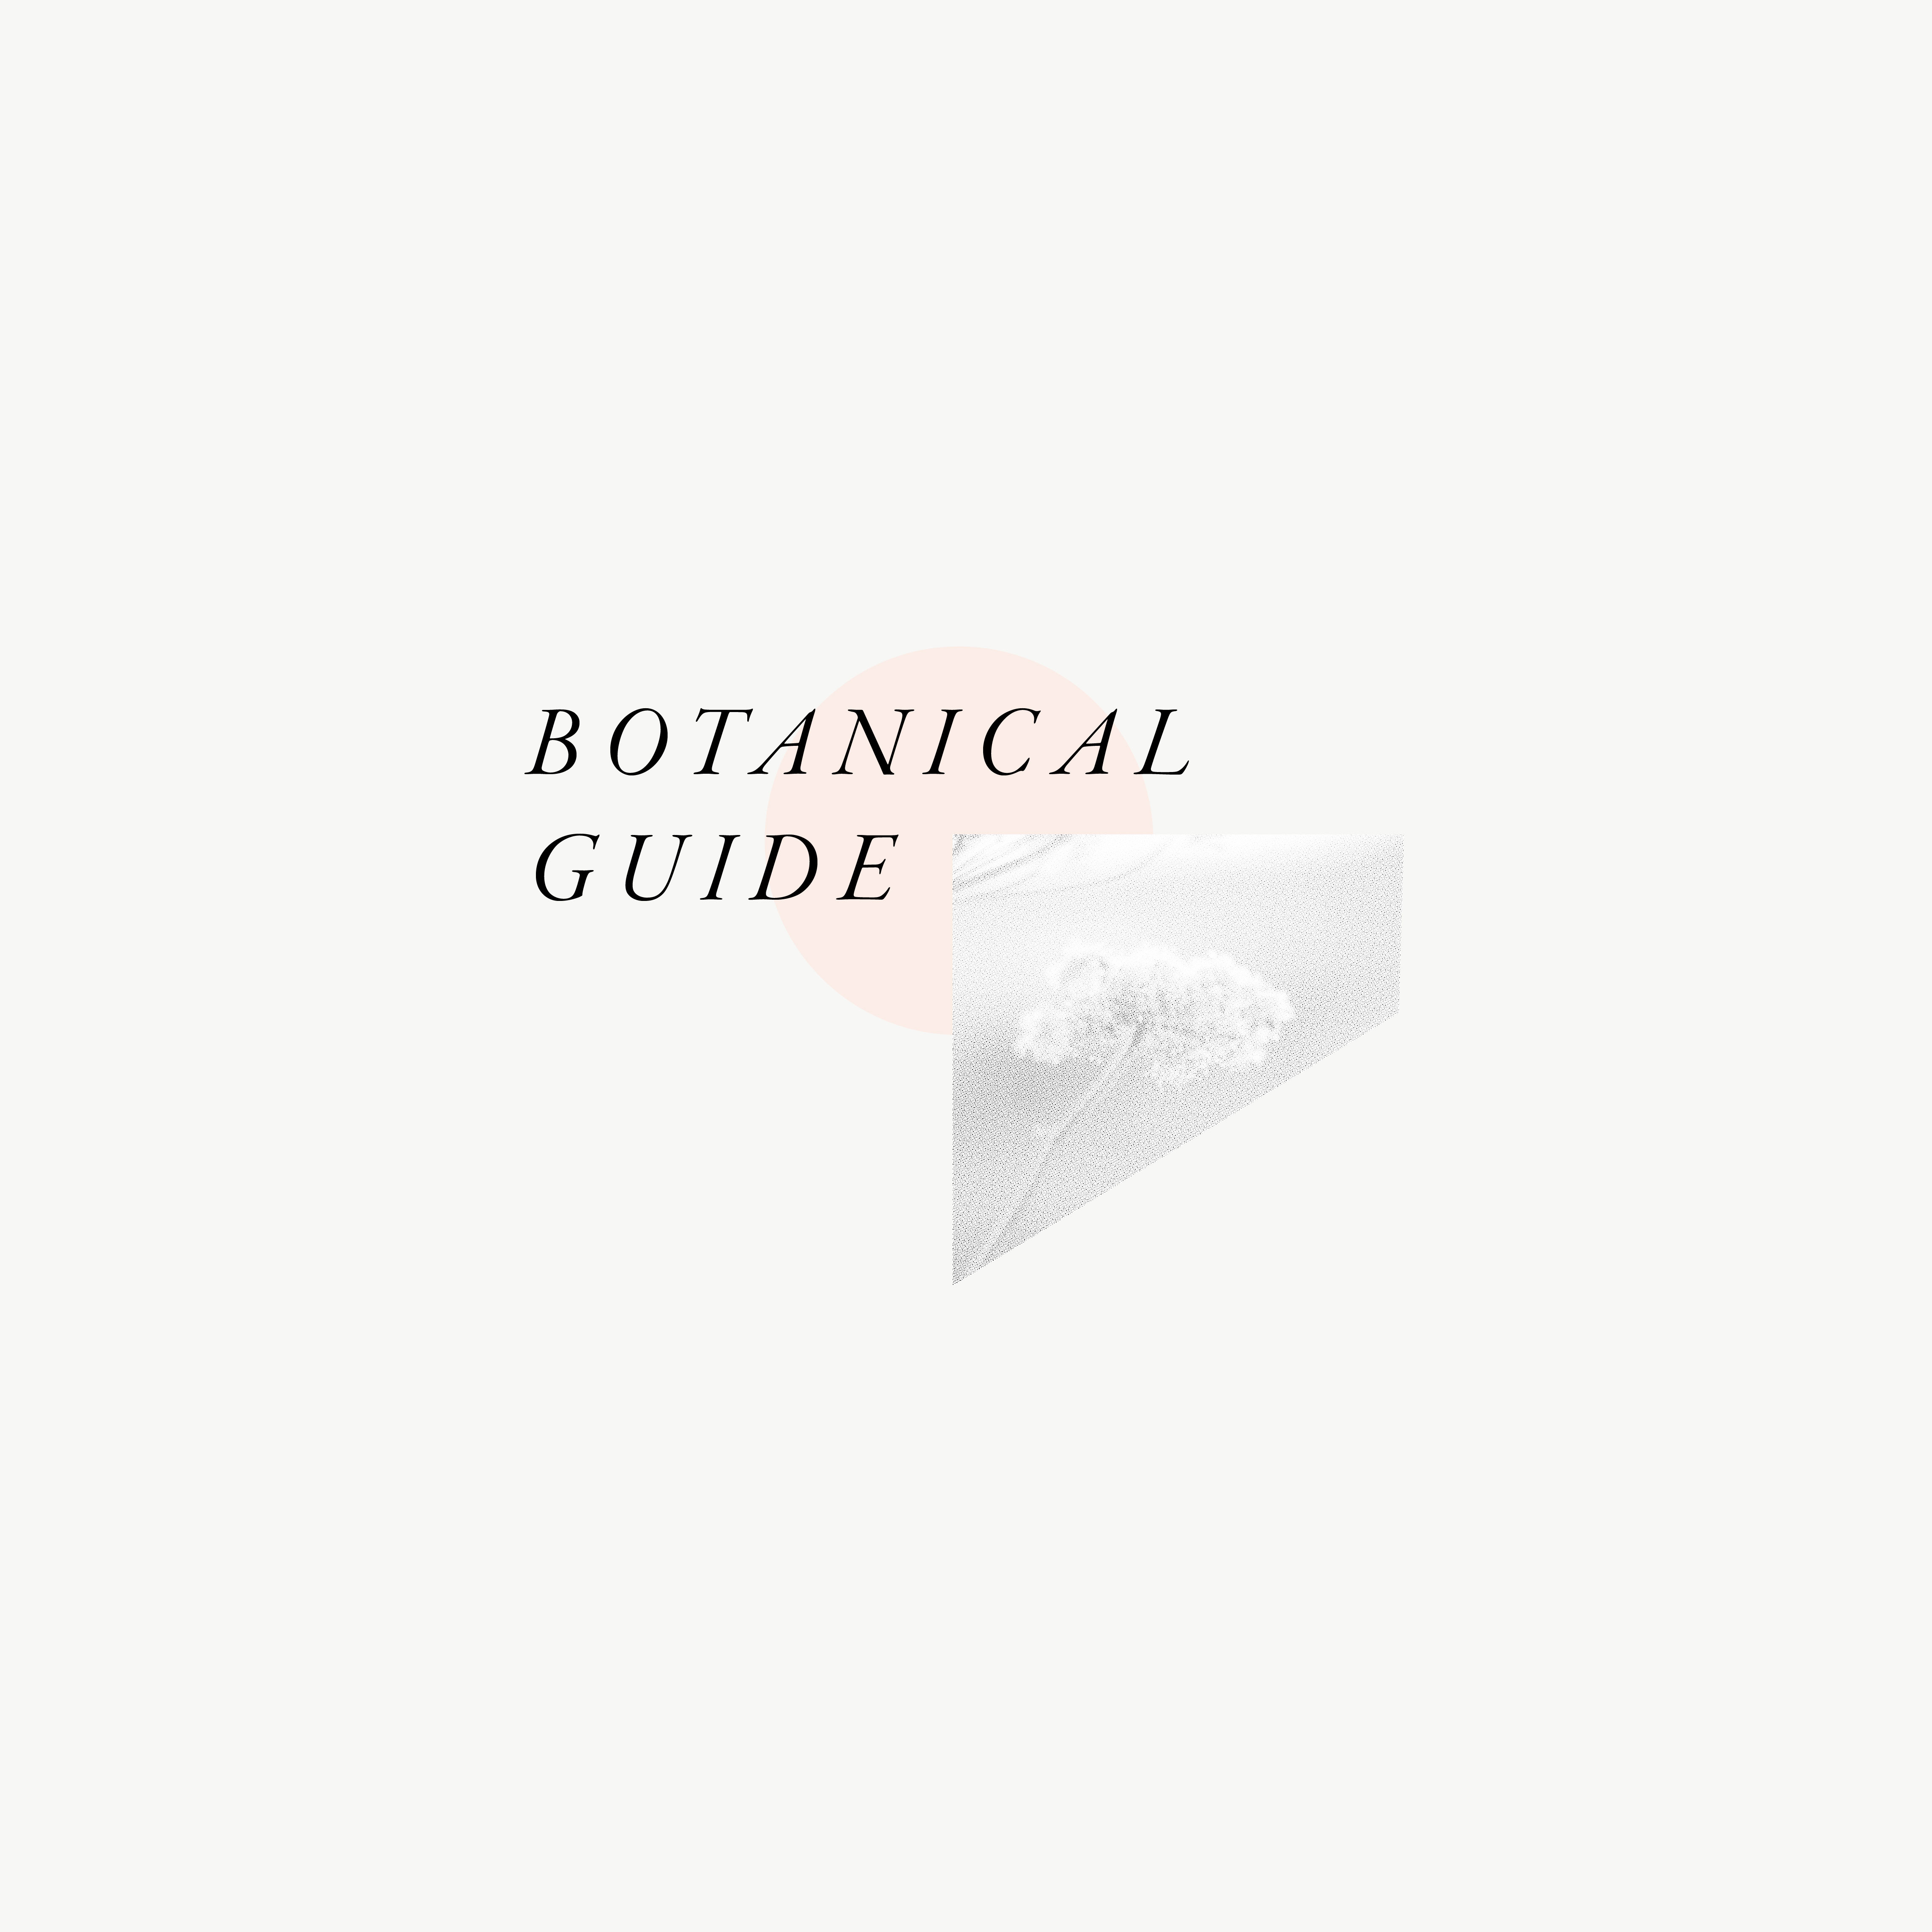 LINK GRAPHIC TO BOTANICAL GUIDE